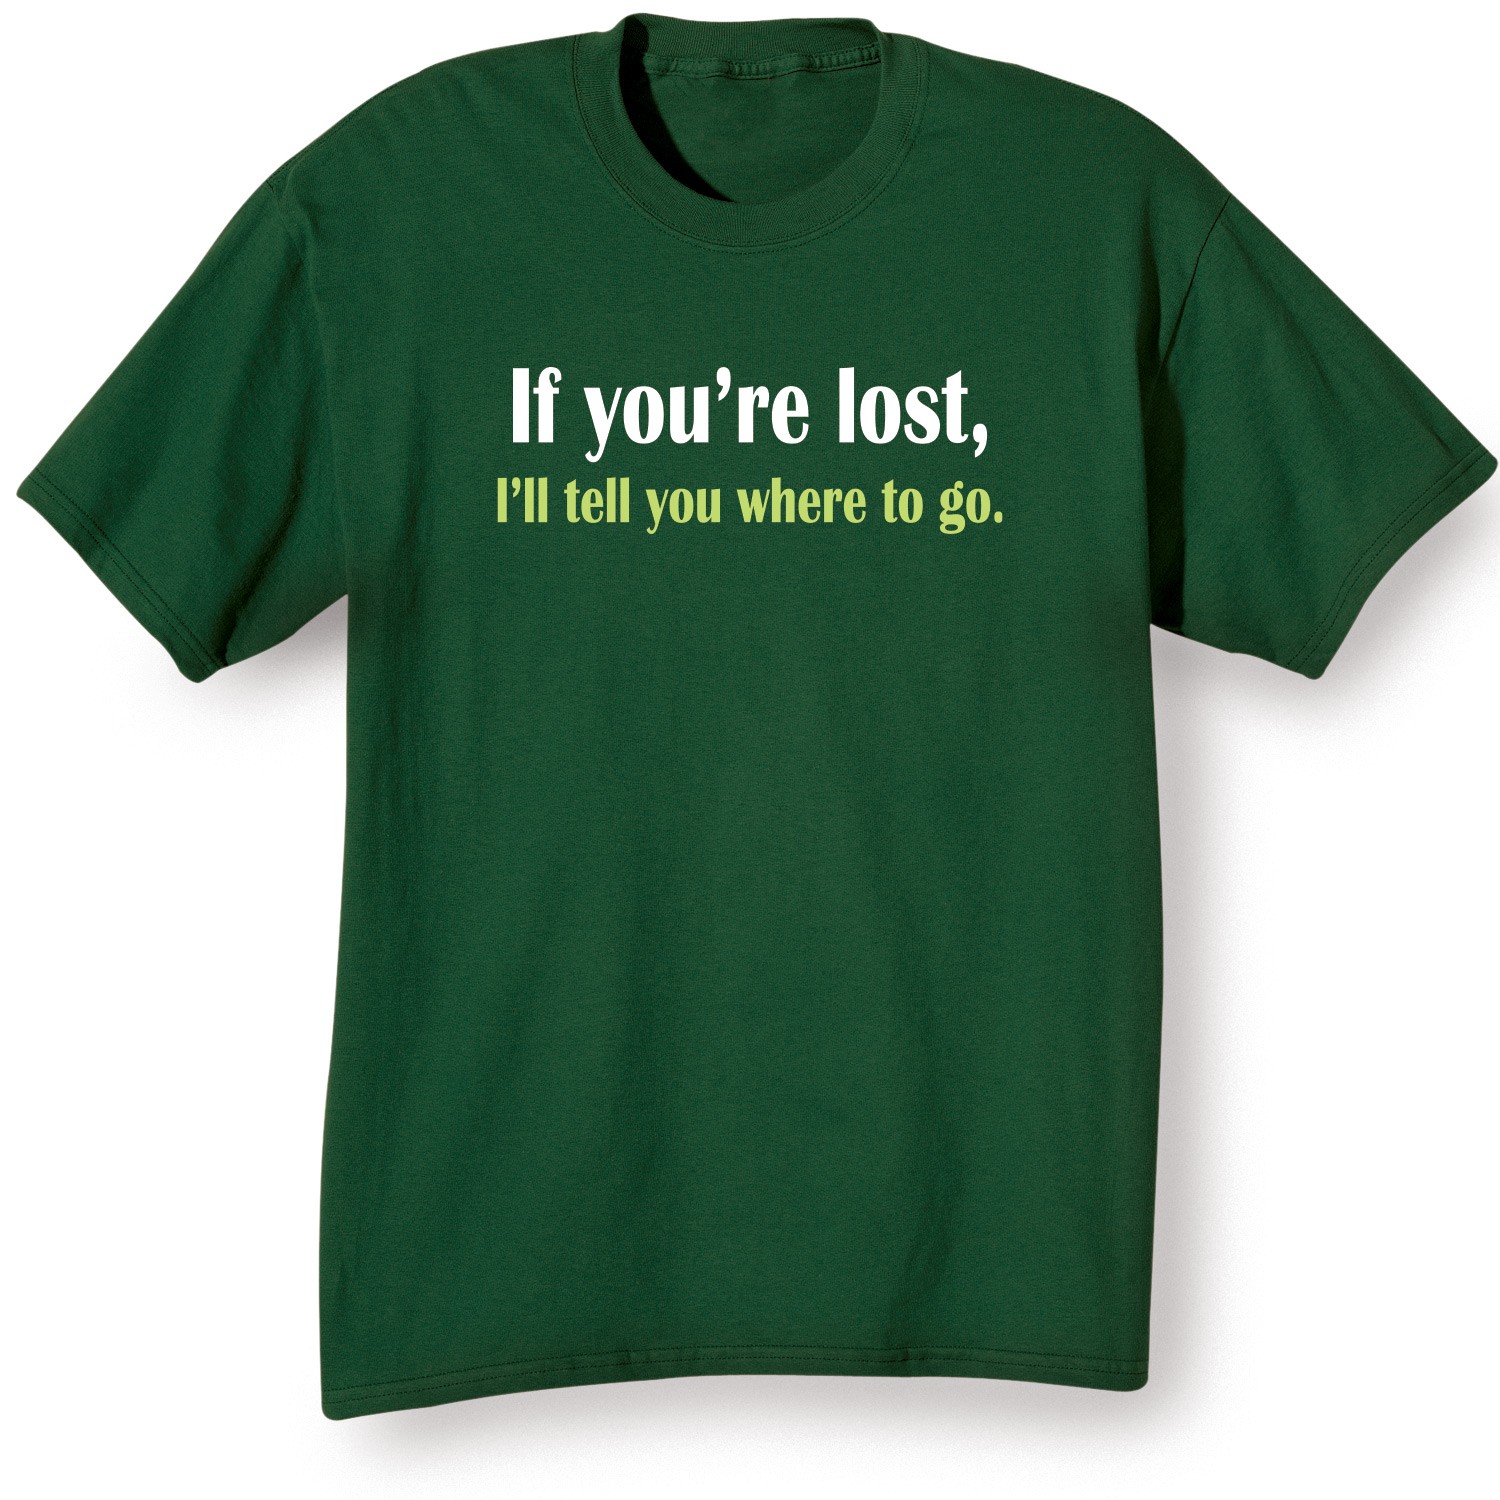 If You're Lost. I'll Tell You Where To Go. Shirts | What on Earth